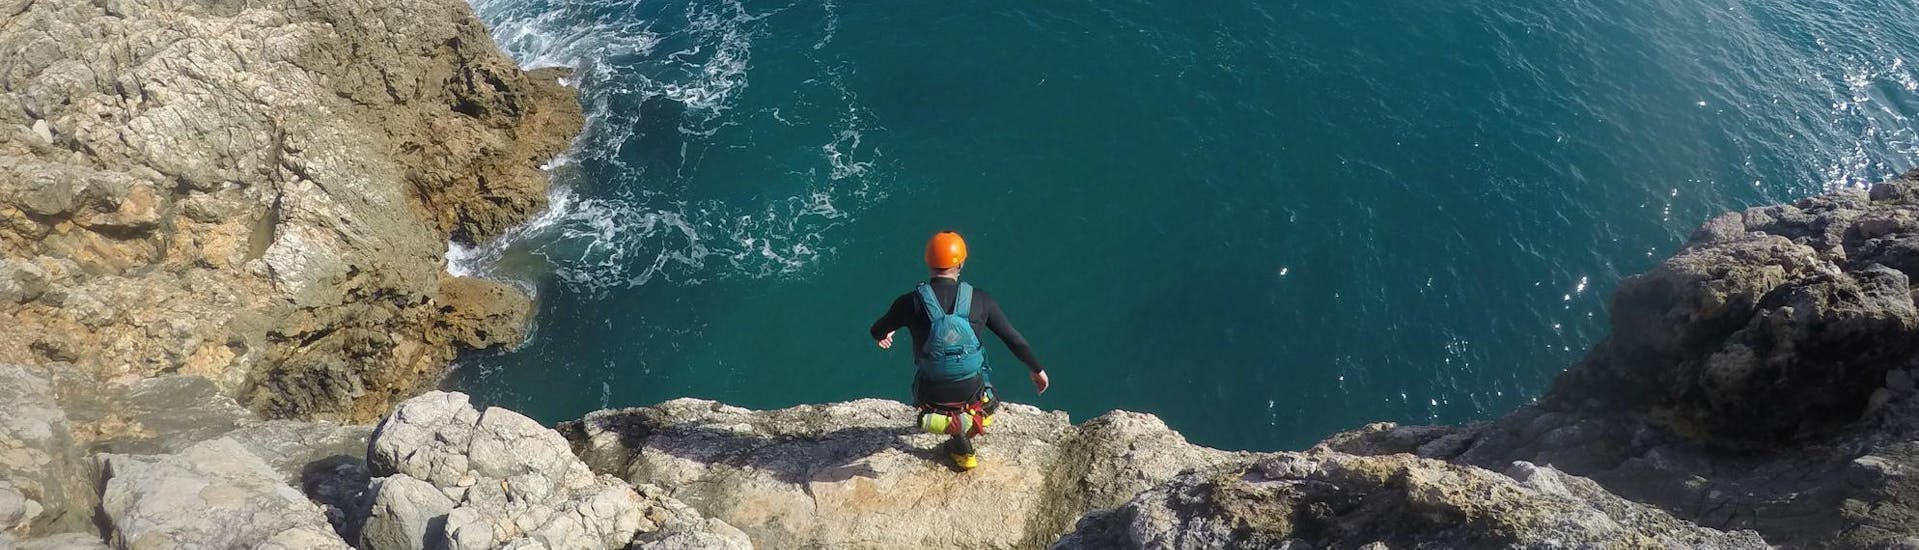 A man jumping off a high cliff on his Coasteering Adventure in Sagres on the side of an experienced guide from Poseidon Adventure.